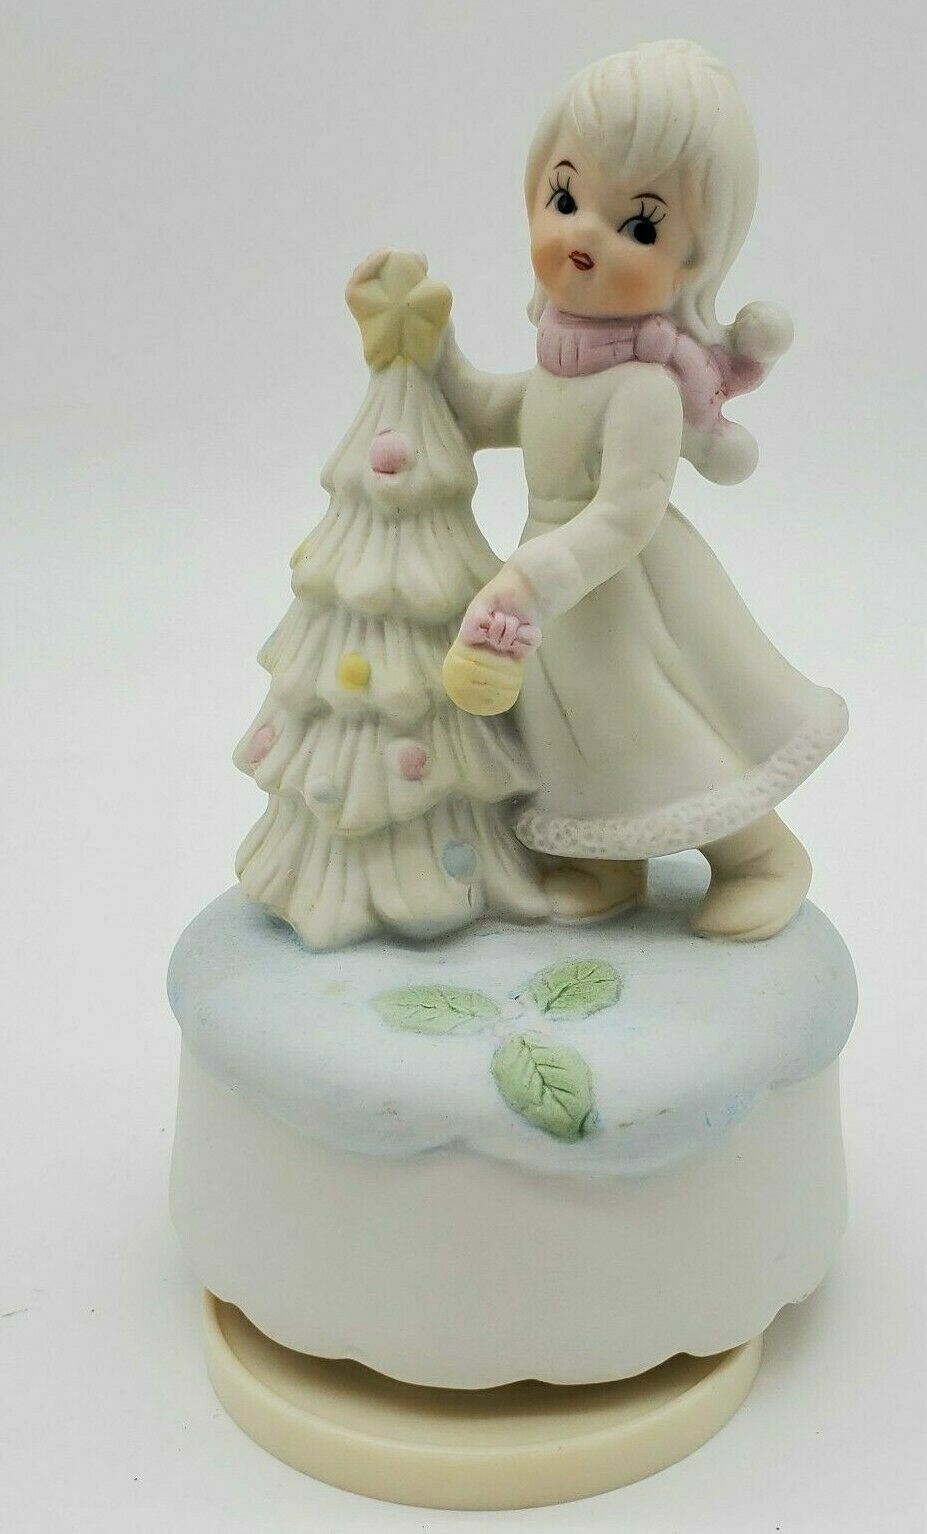 Vintage Young Child with Christmas Tree Music Box - Ceramic Porcelain Rotating